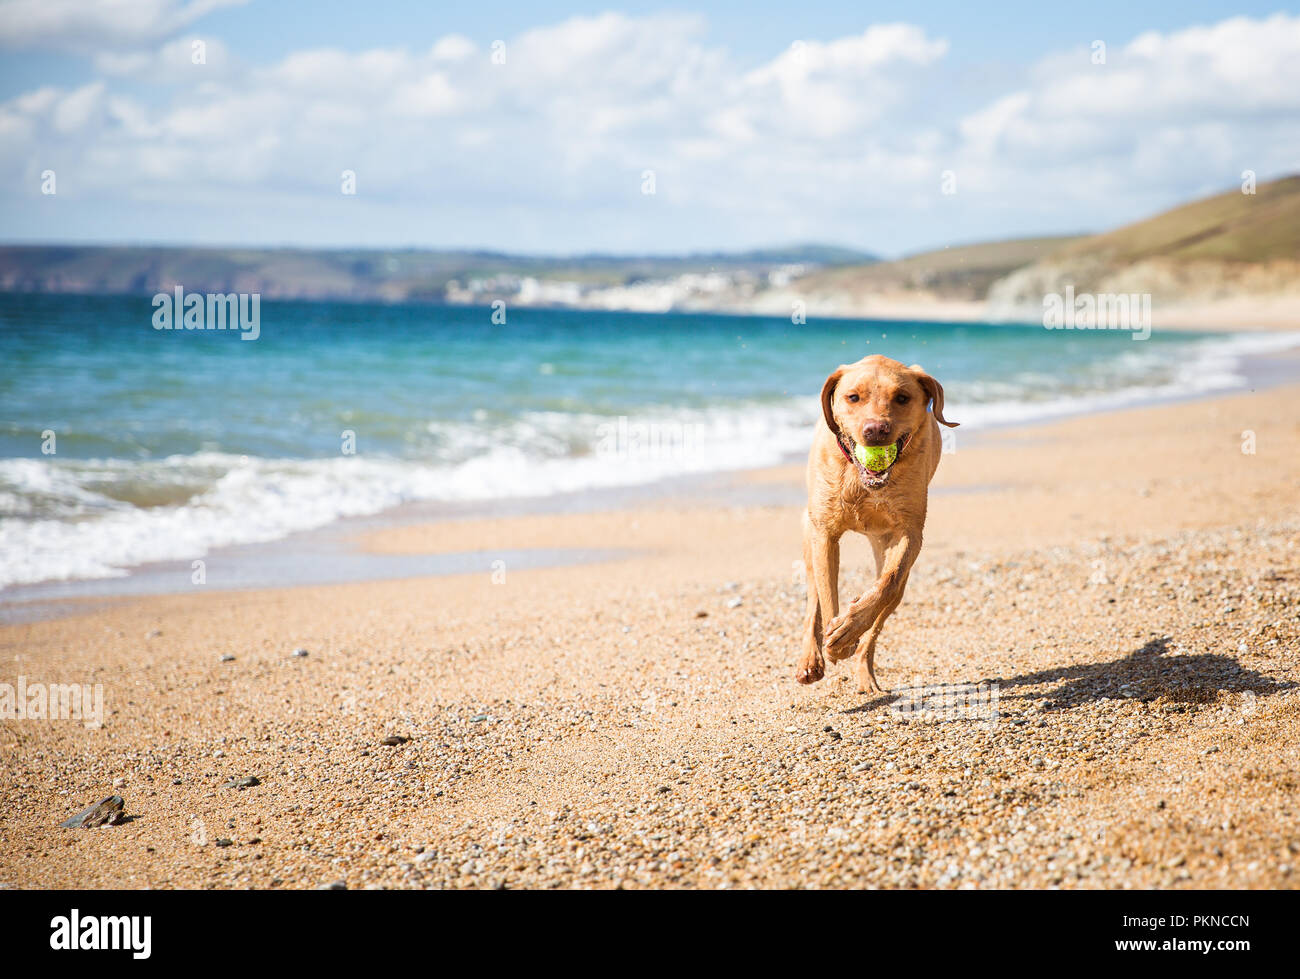 A happy, yellow Labrador retriever dog running on a deserted sandy beach and carrying or fetching a tennis ball in its mouth Stock Photo